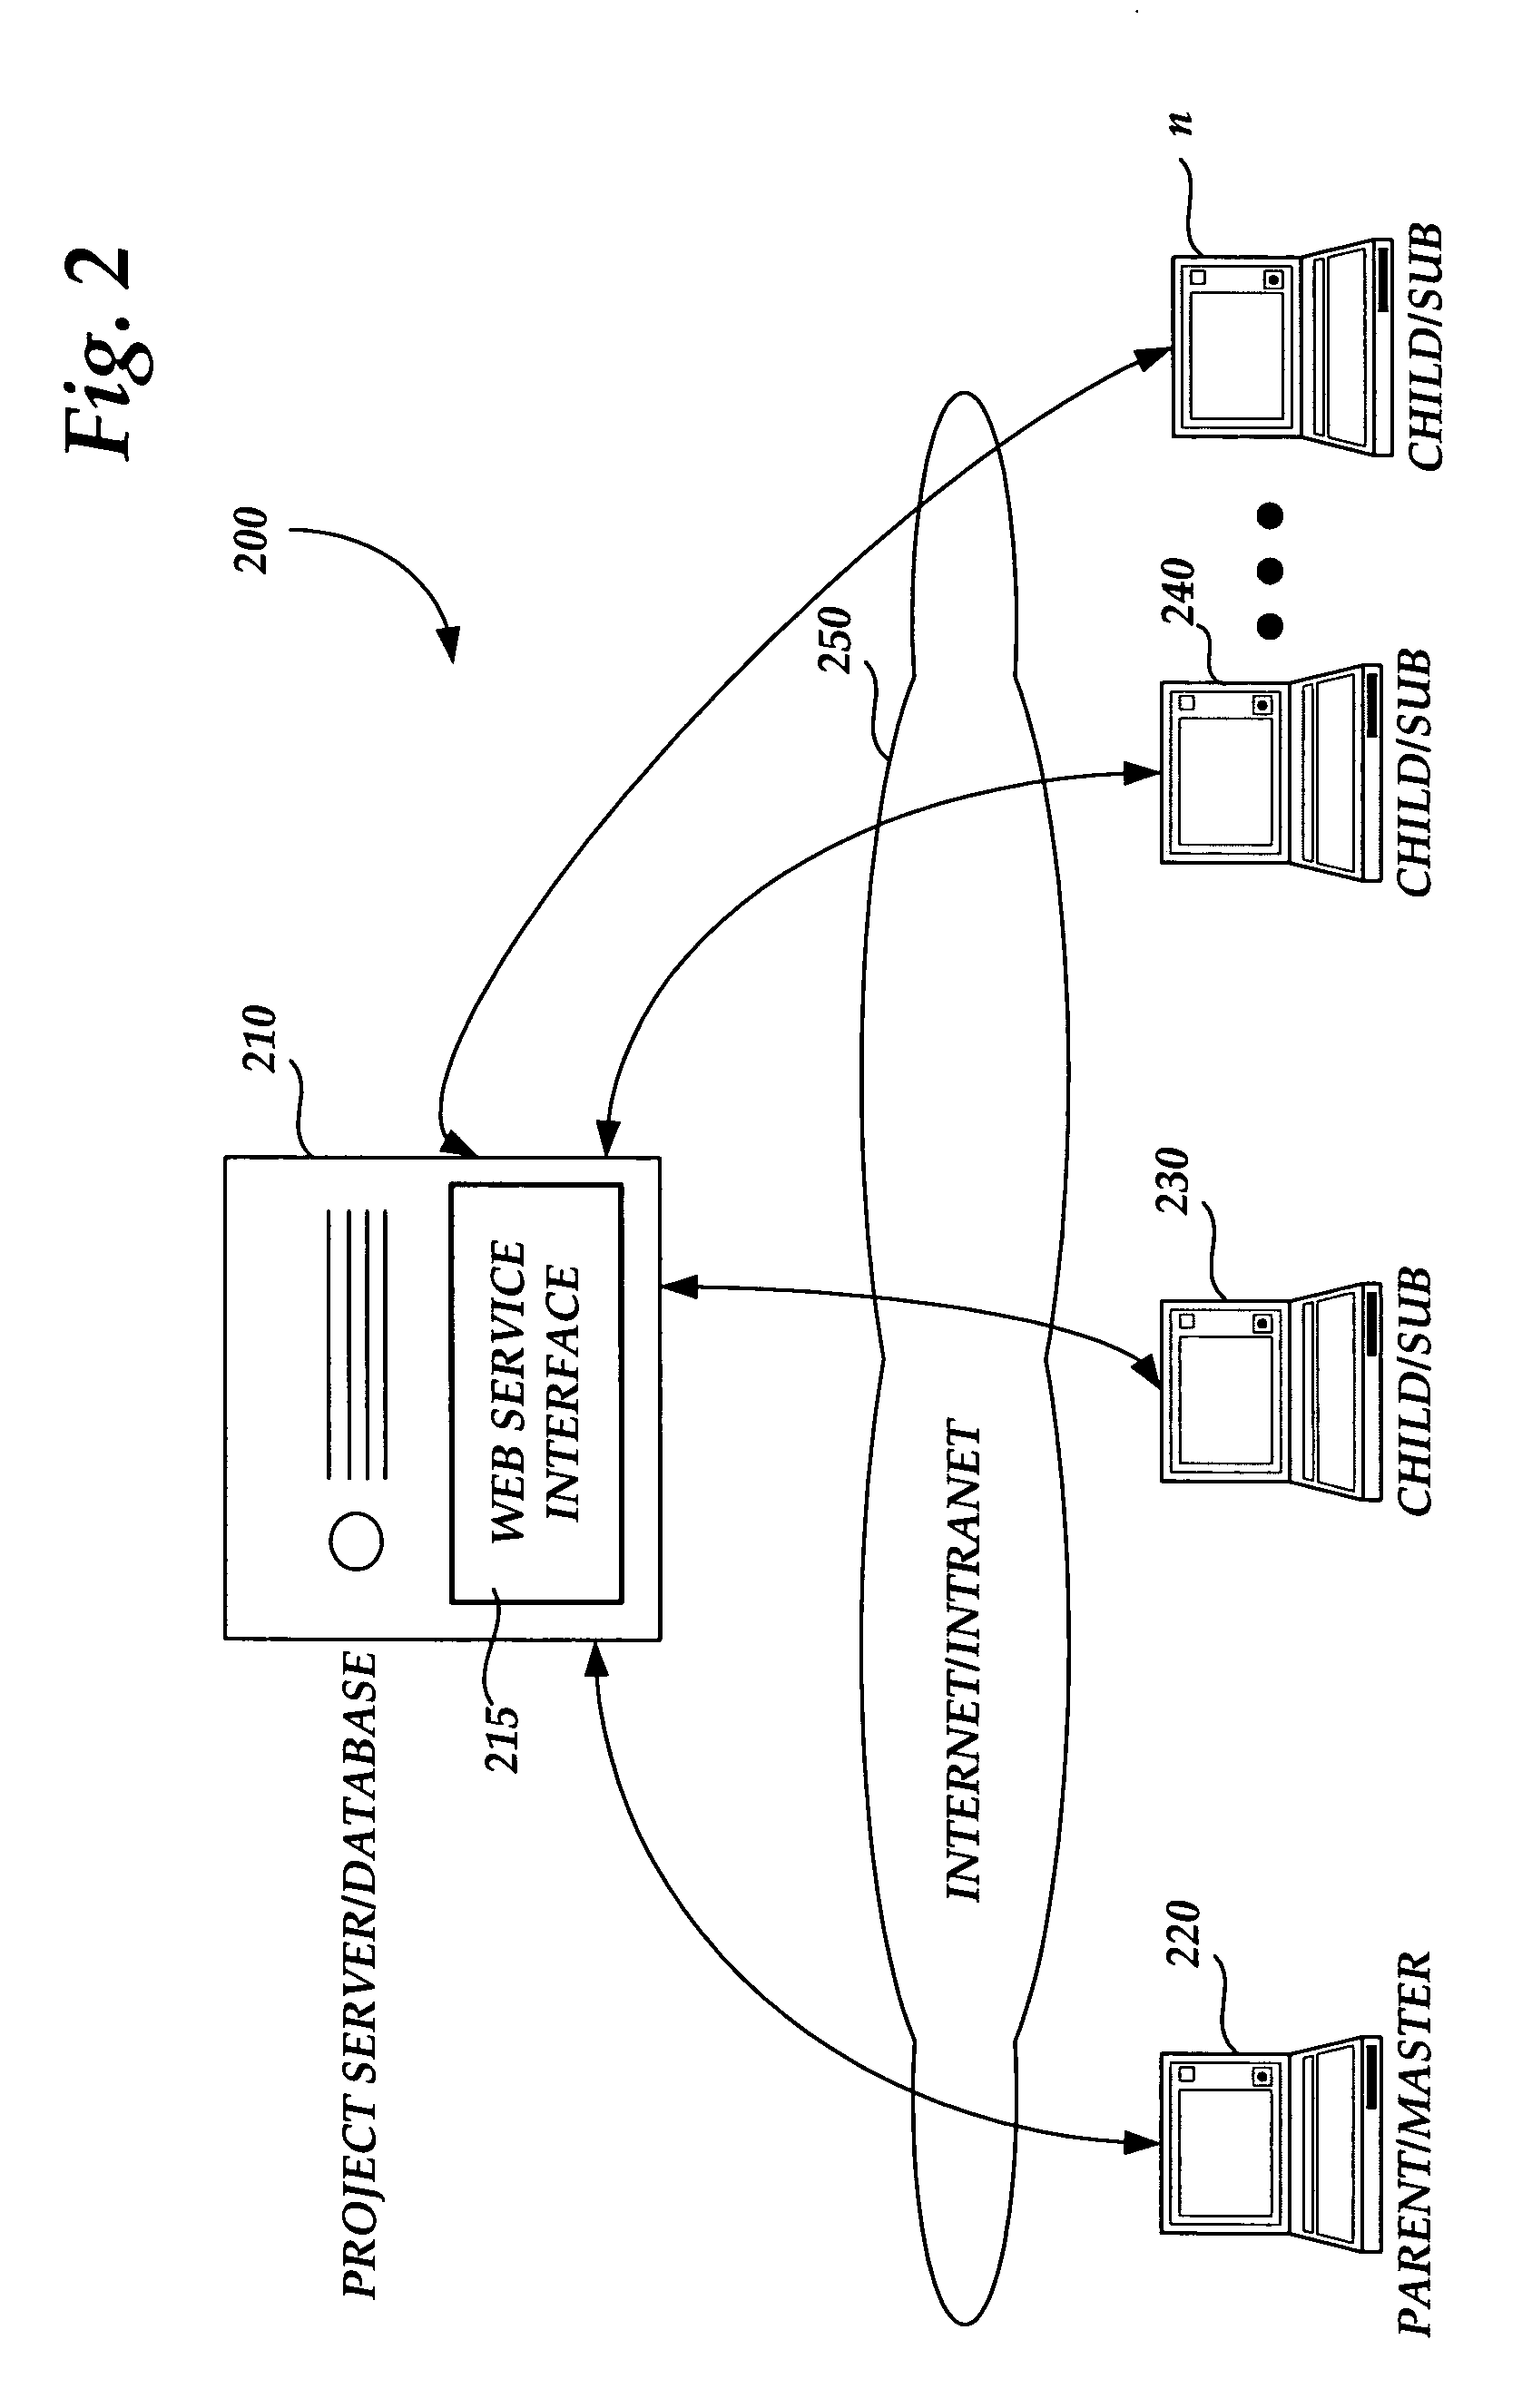 Methods and systems for caching and synchronizing project data